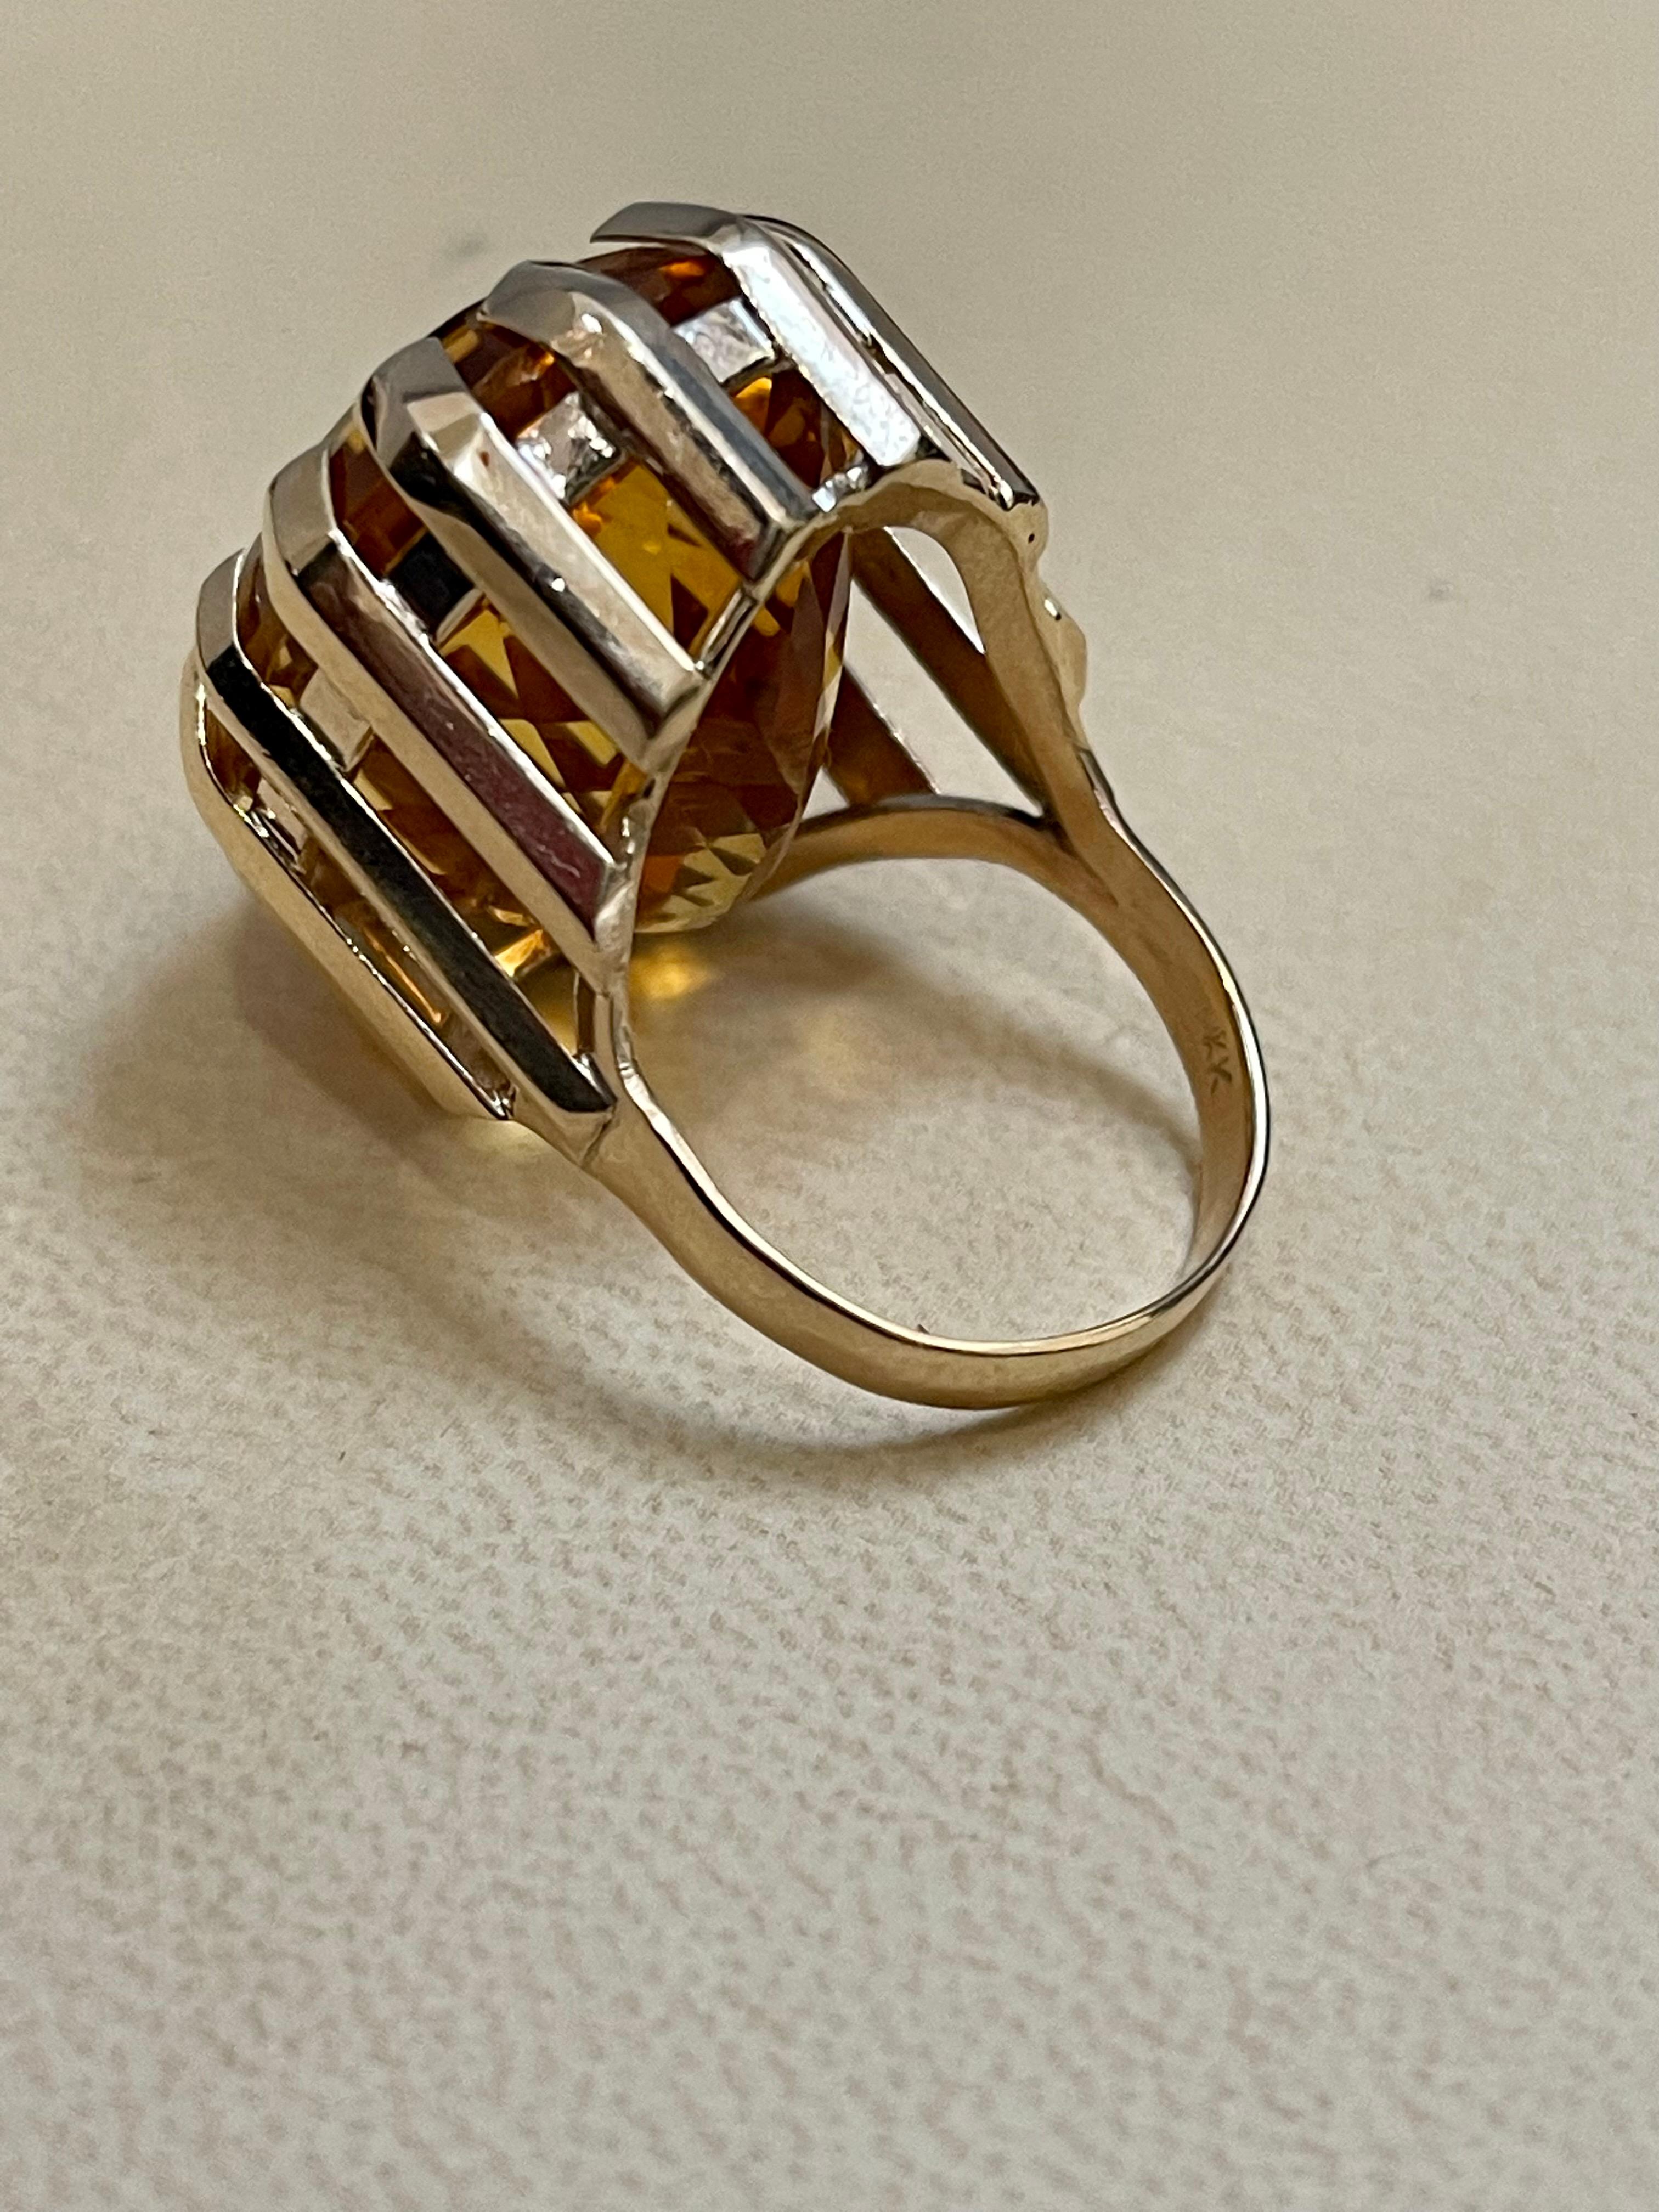 42 Carat Natural Oval Citrine Cocktail Ring in 14 Karat Yellow Gold, Estate In Excellent Condition For Sale In New York, NY